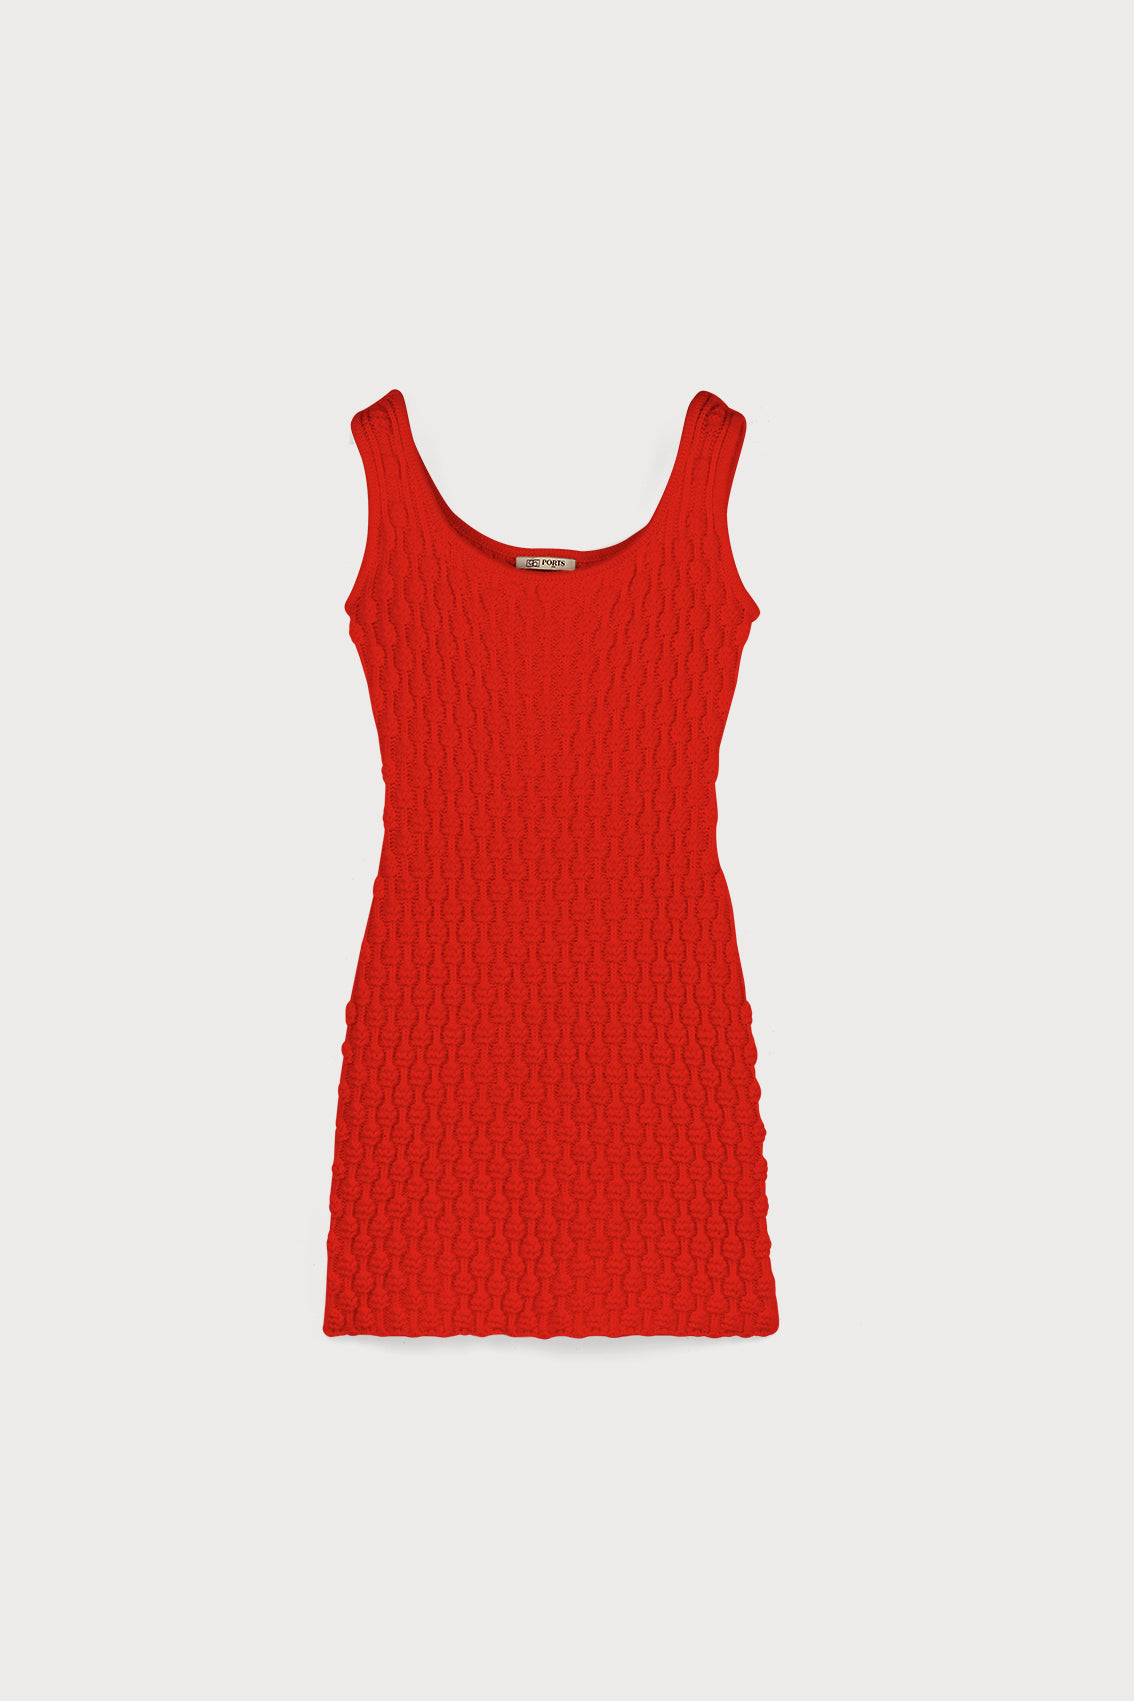 Sleeveless Bubble Stitch Knitted Dress in Fire Red